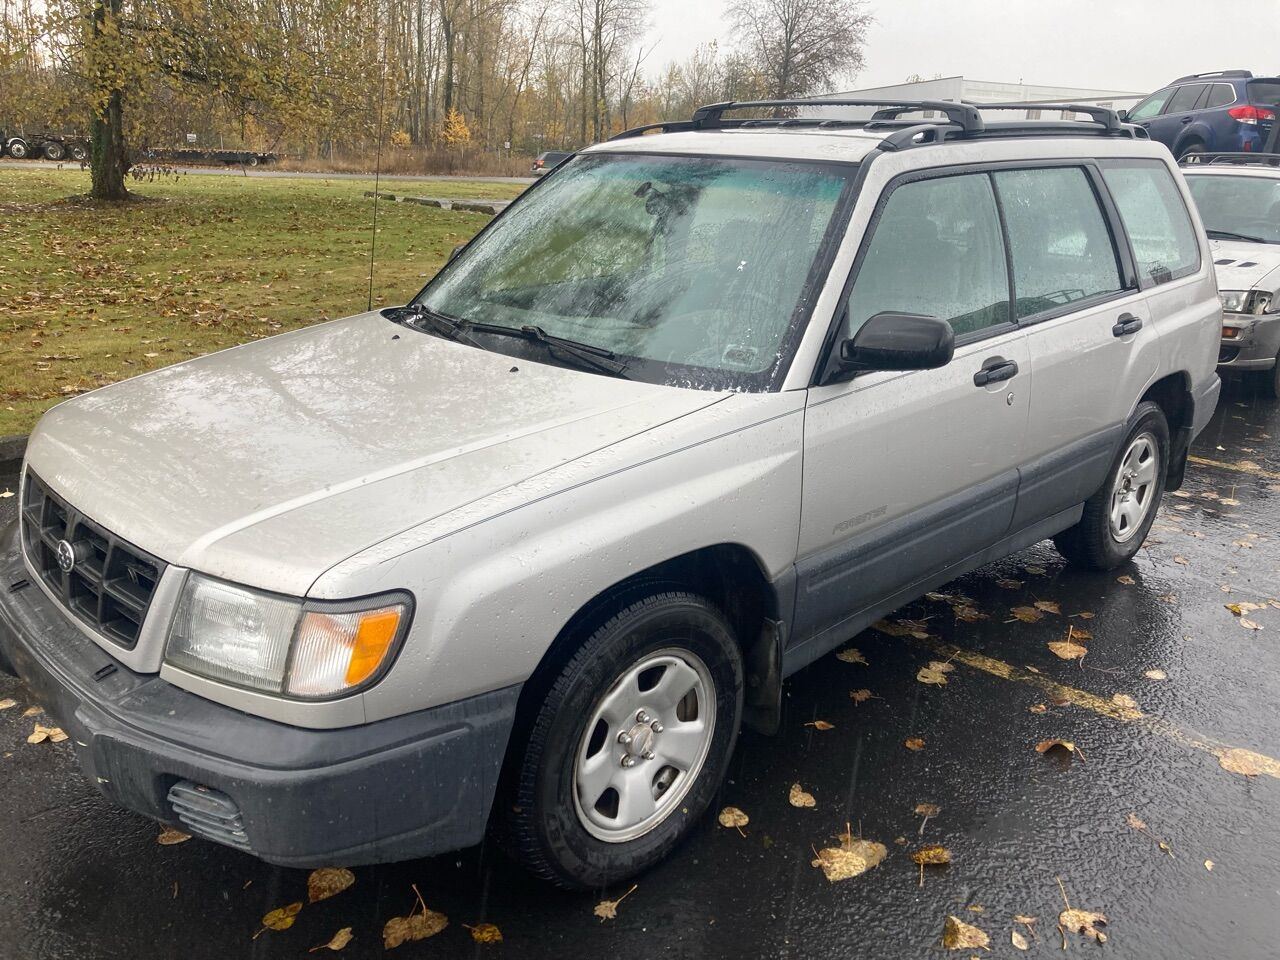 2000 Subaru Forester For Sale In Uniontown, OH - Carsforsale.com®